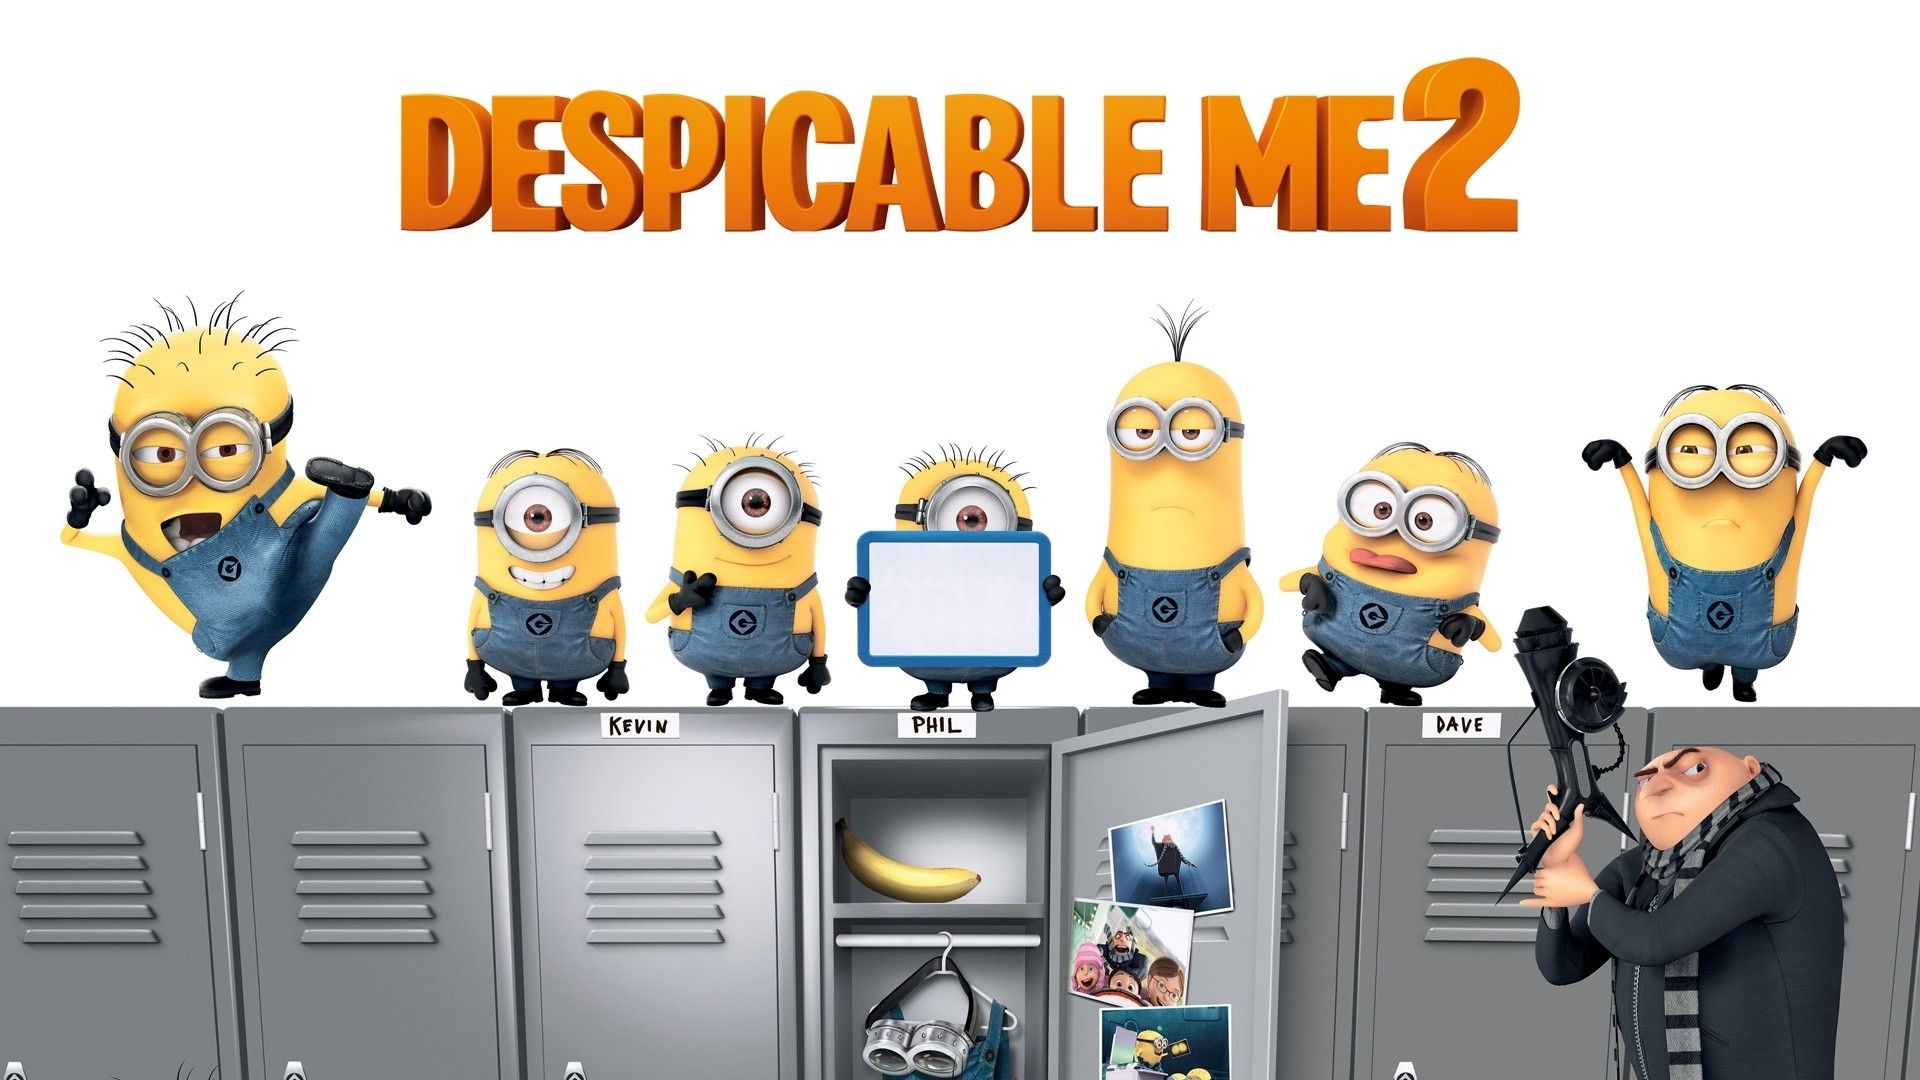 10 Top Despicable Me 2 Wallpaper FULL HD 1080p For PC Background